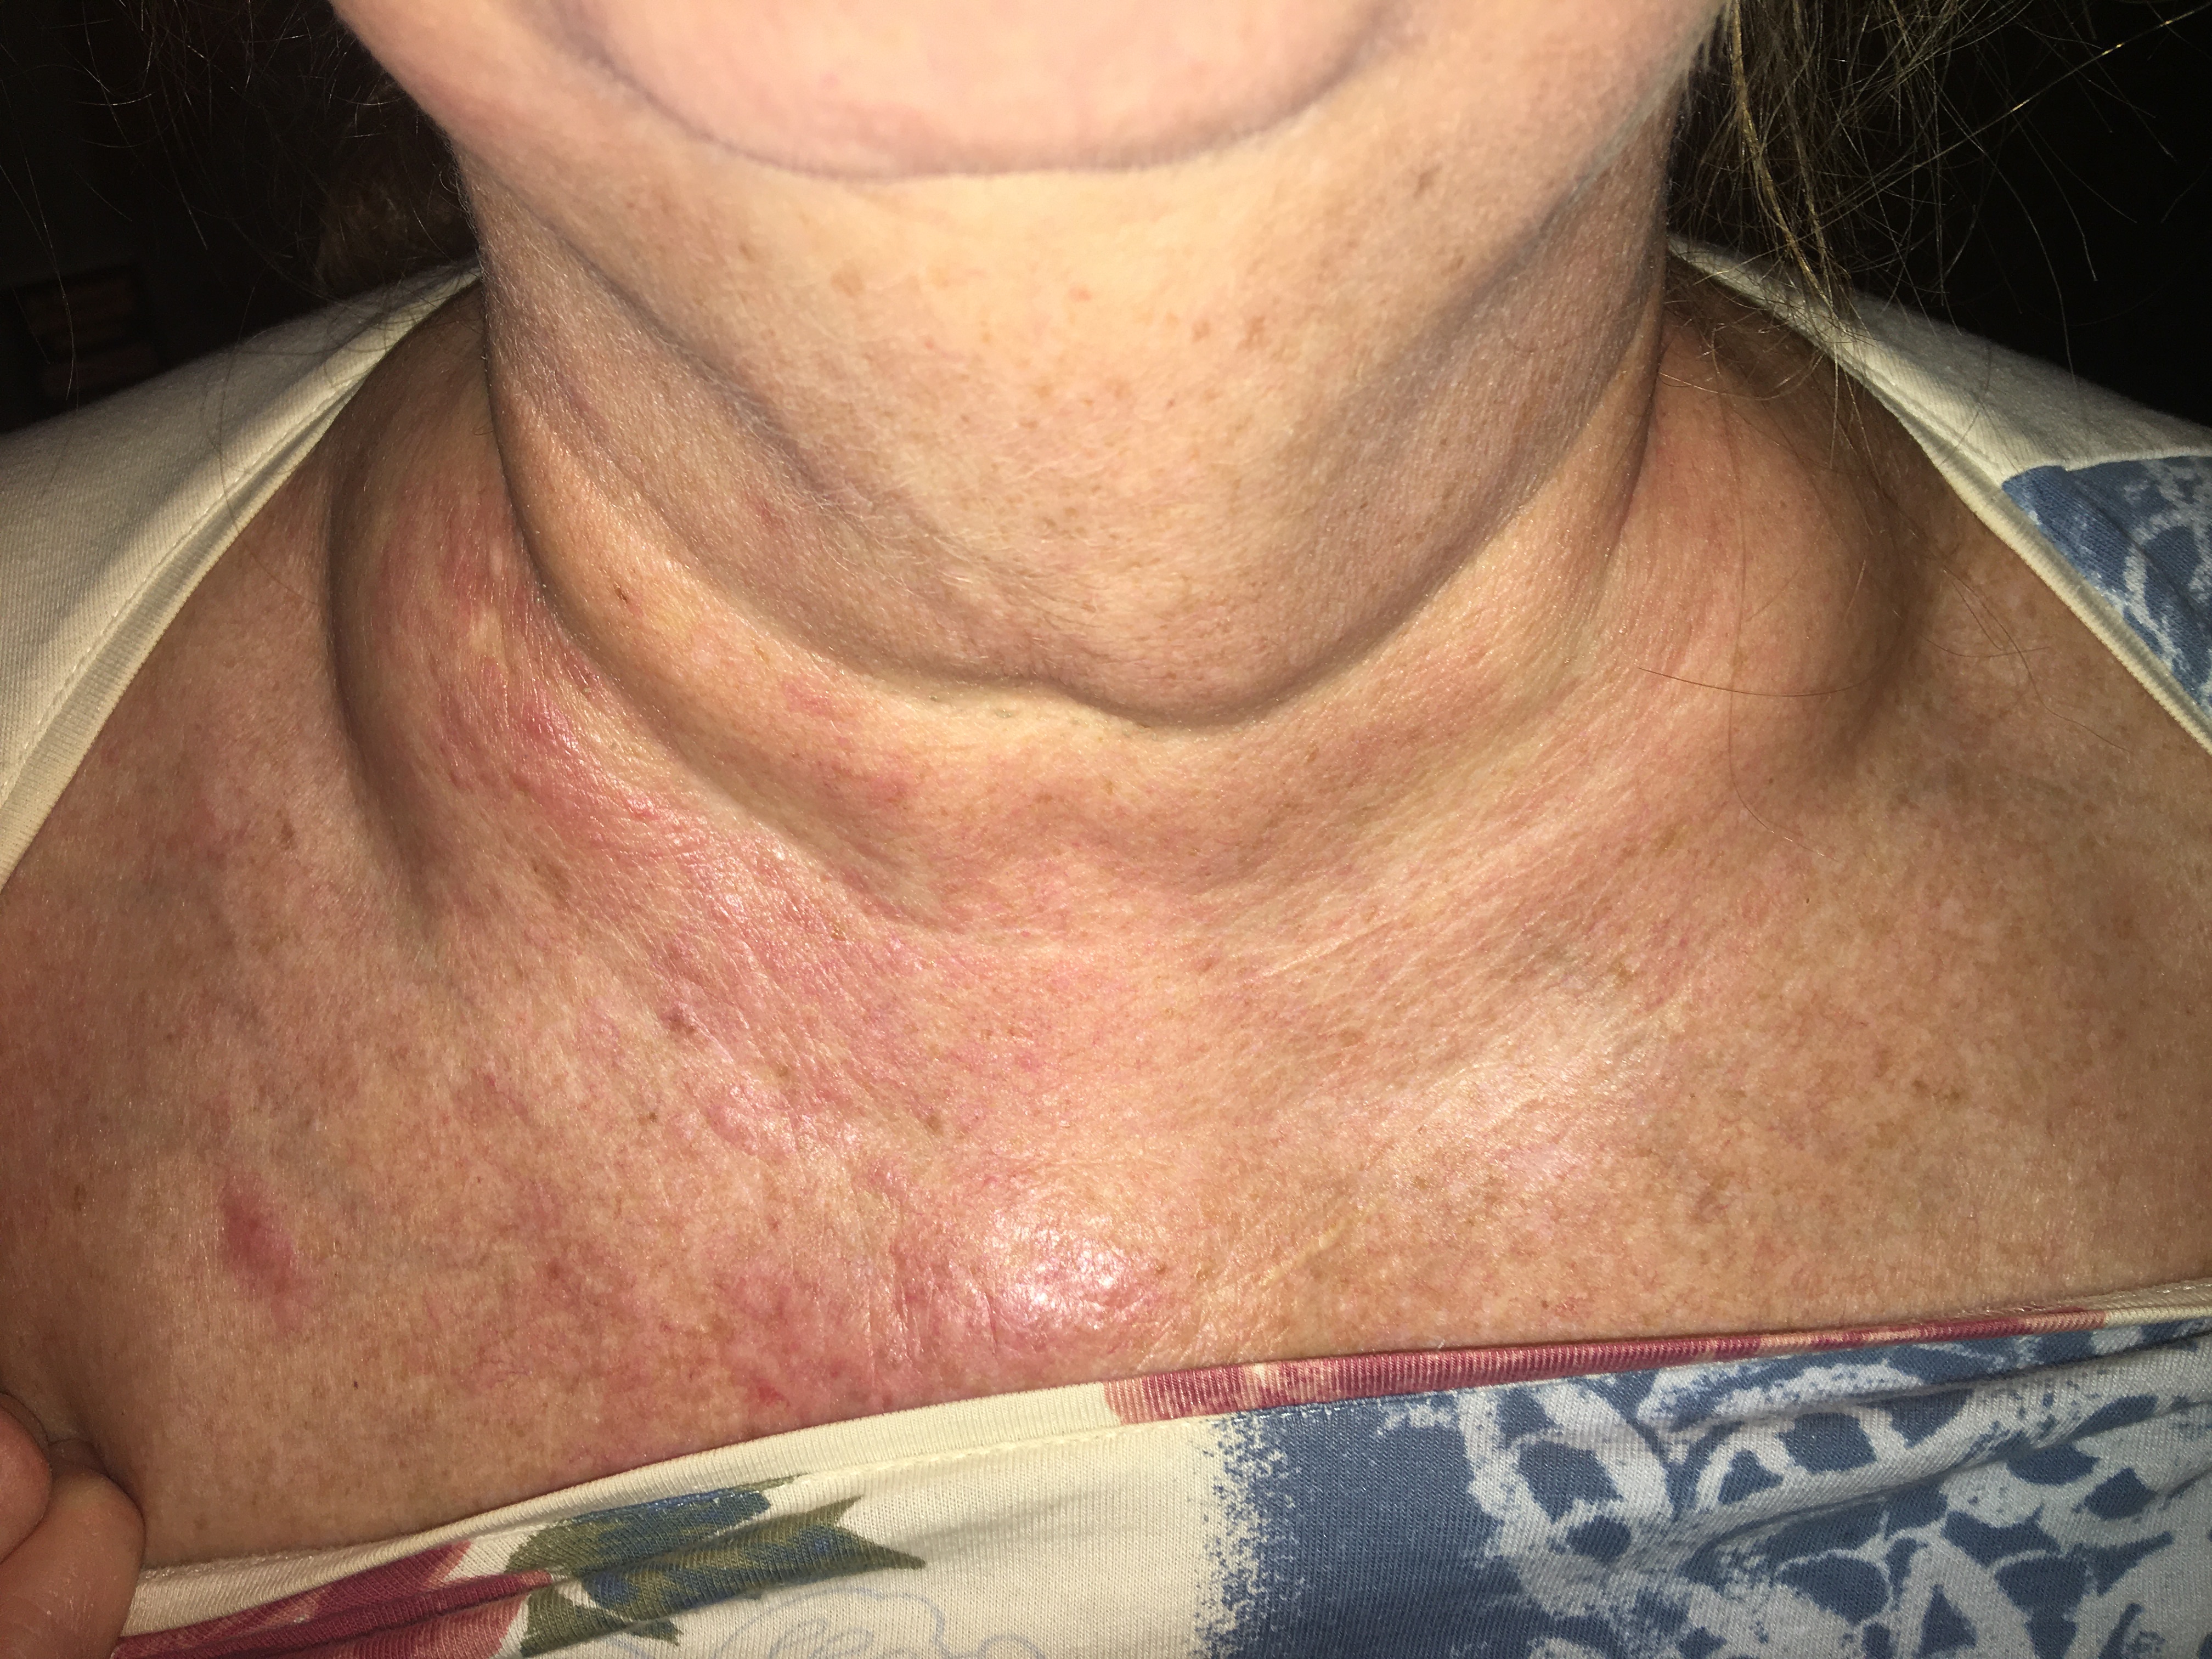 images of swollen supraclavicular lymph nodes